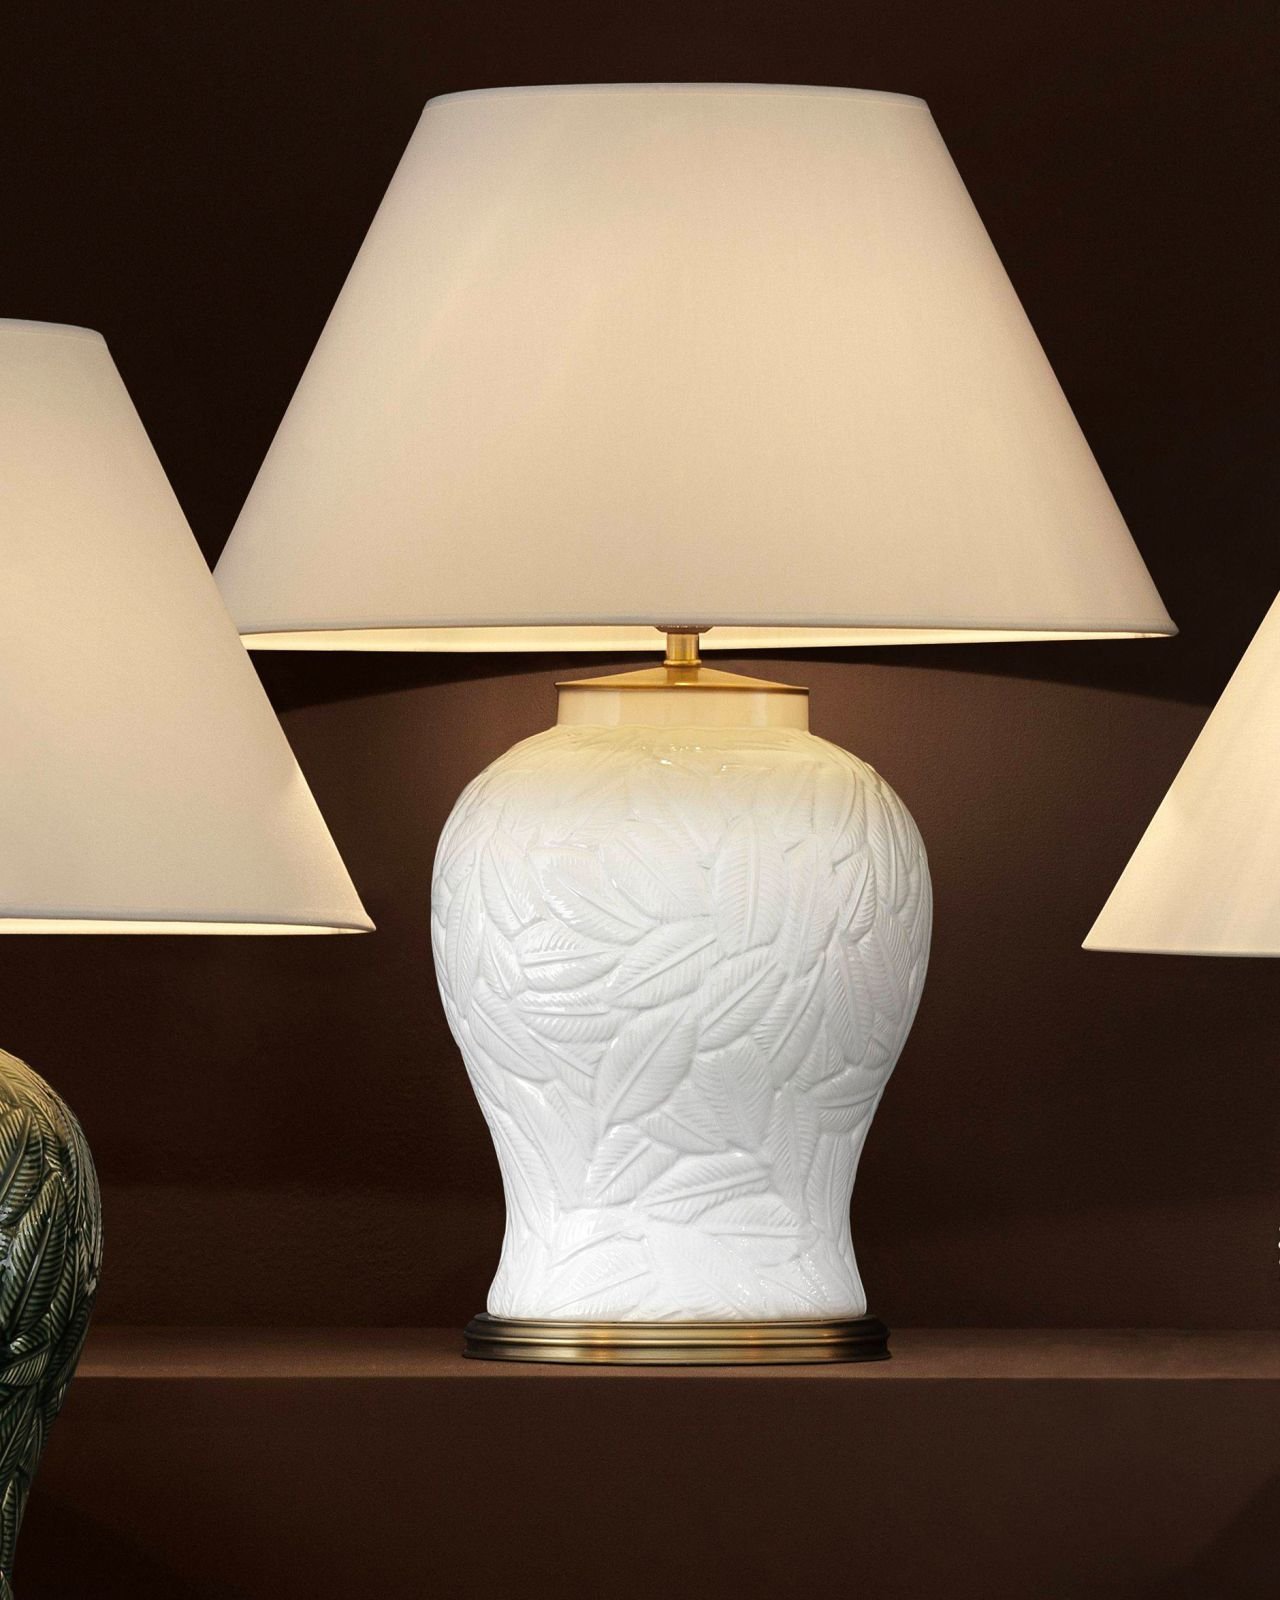 Cyprus Table Lamp White